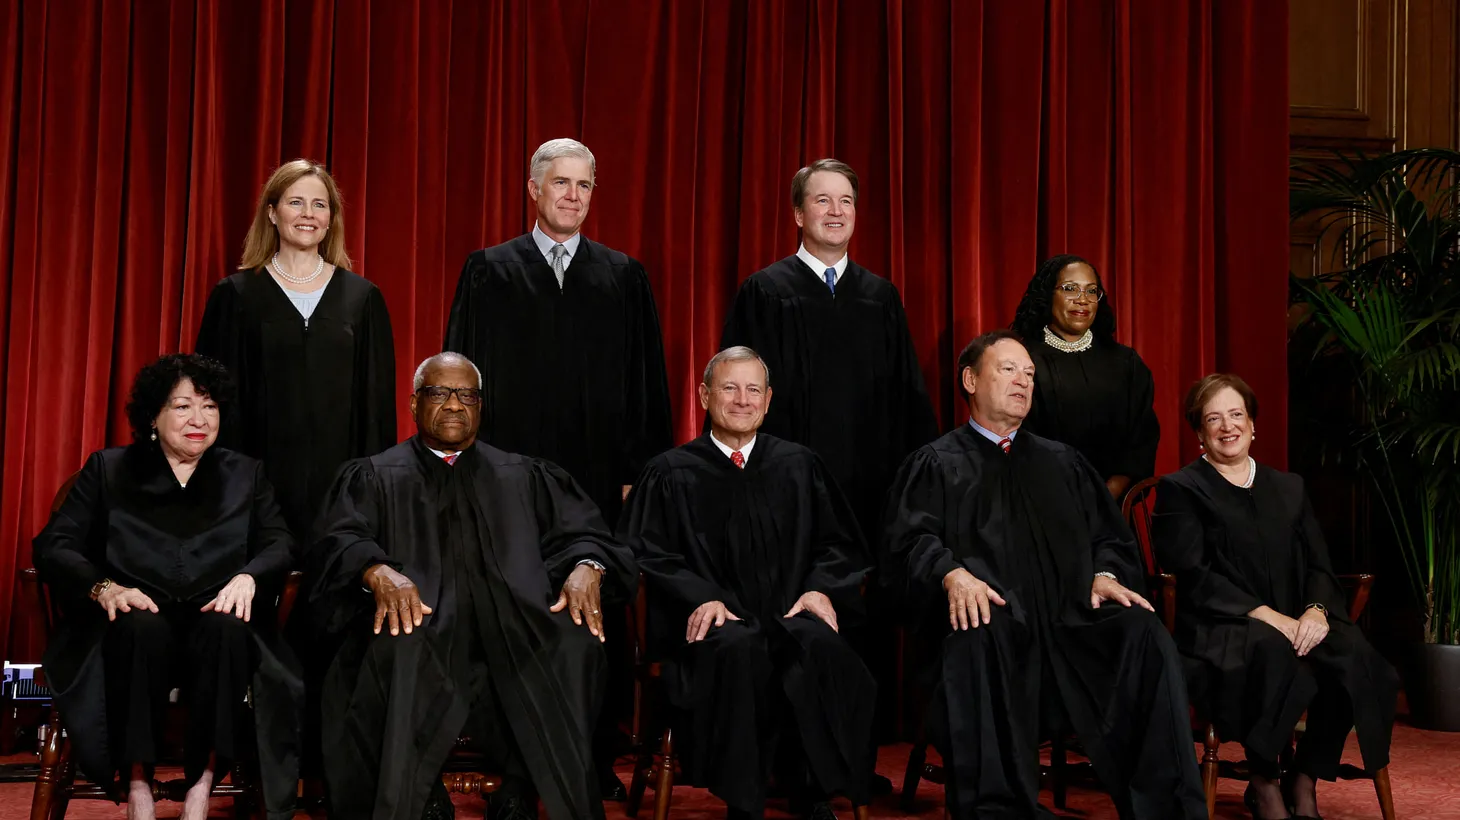 U.S. Supreme Court justices pose for their group portrait at the Supreme Court in Washington, U.S., October 7, 2022.